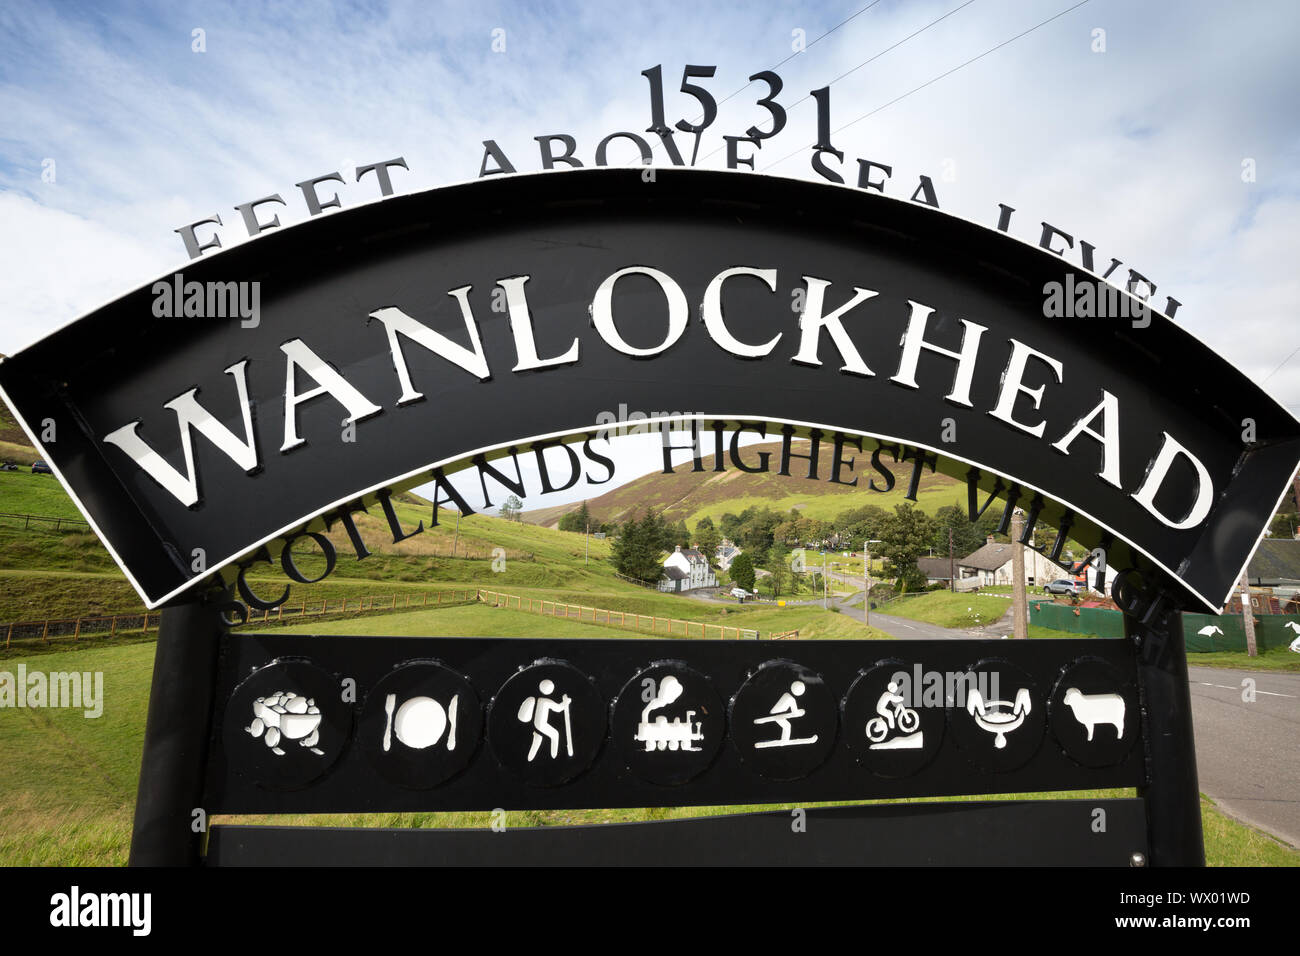 Wanlockhead the highest village in Scotland and the UK at 1531 feet above sea level Stock Photo